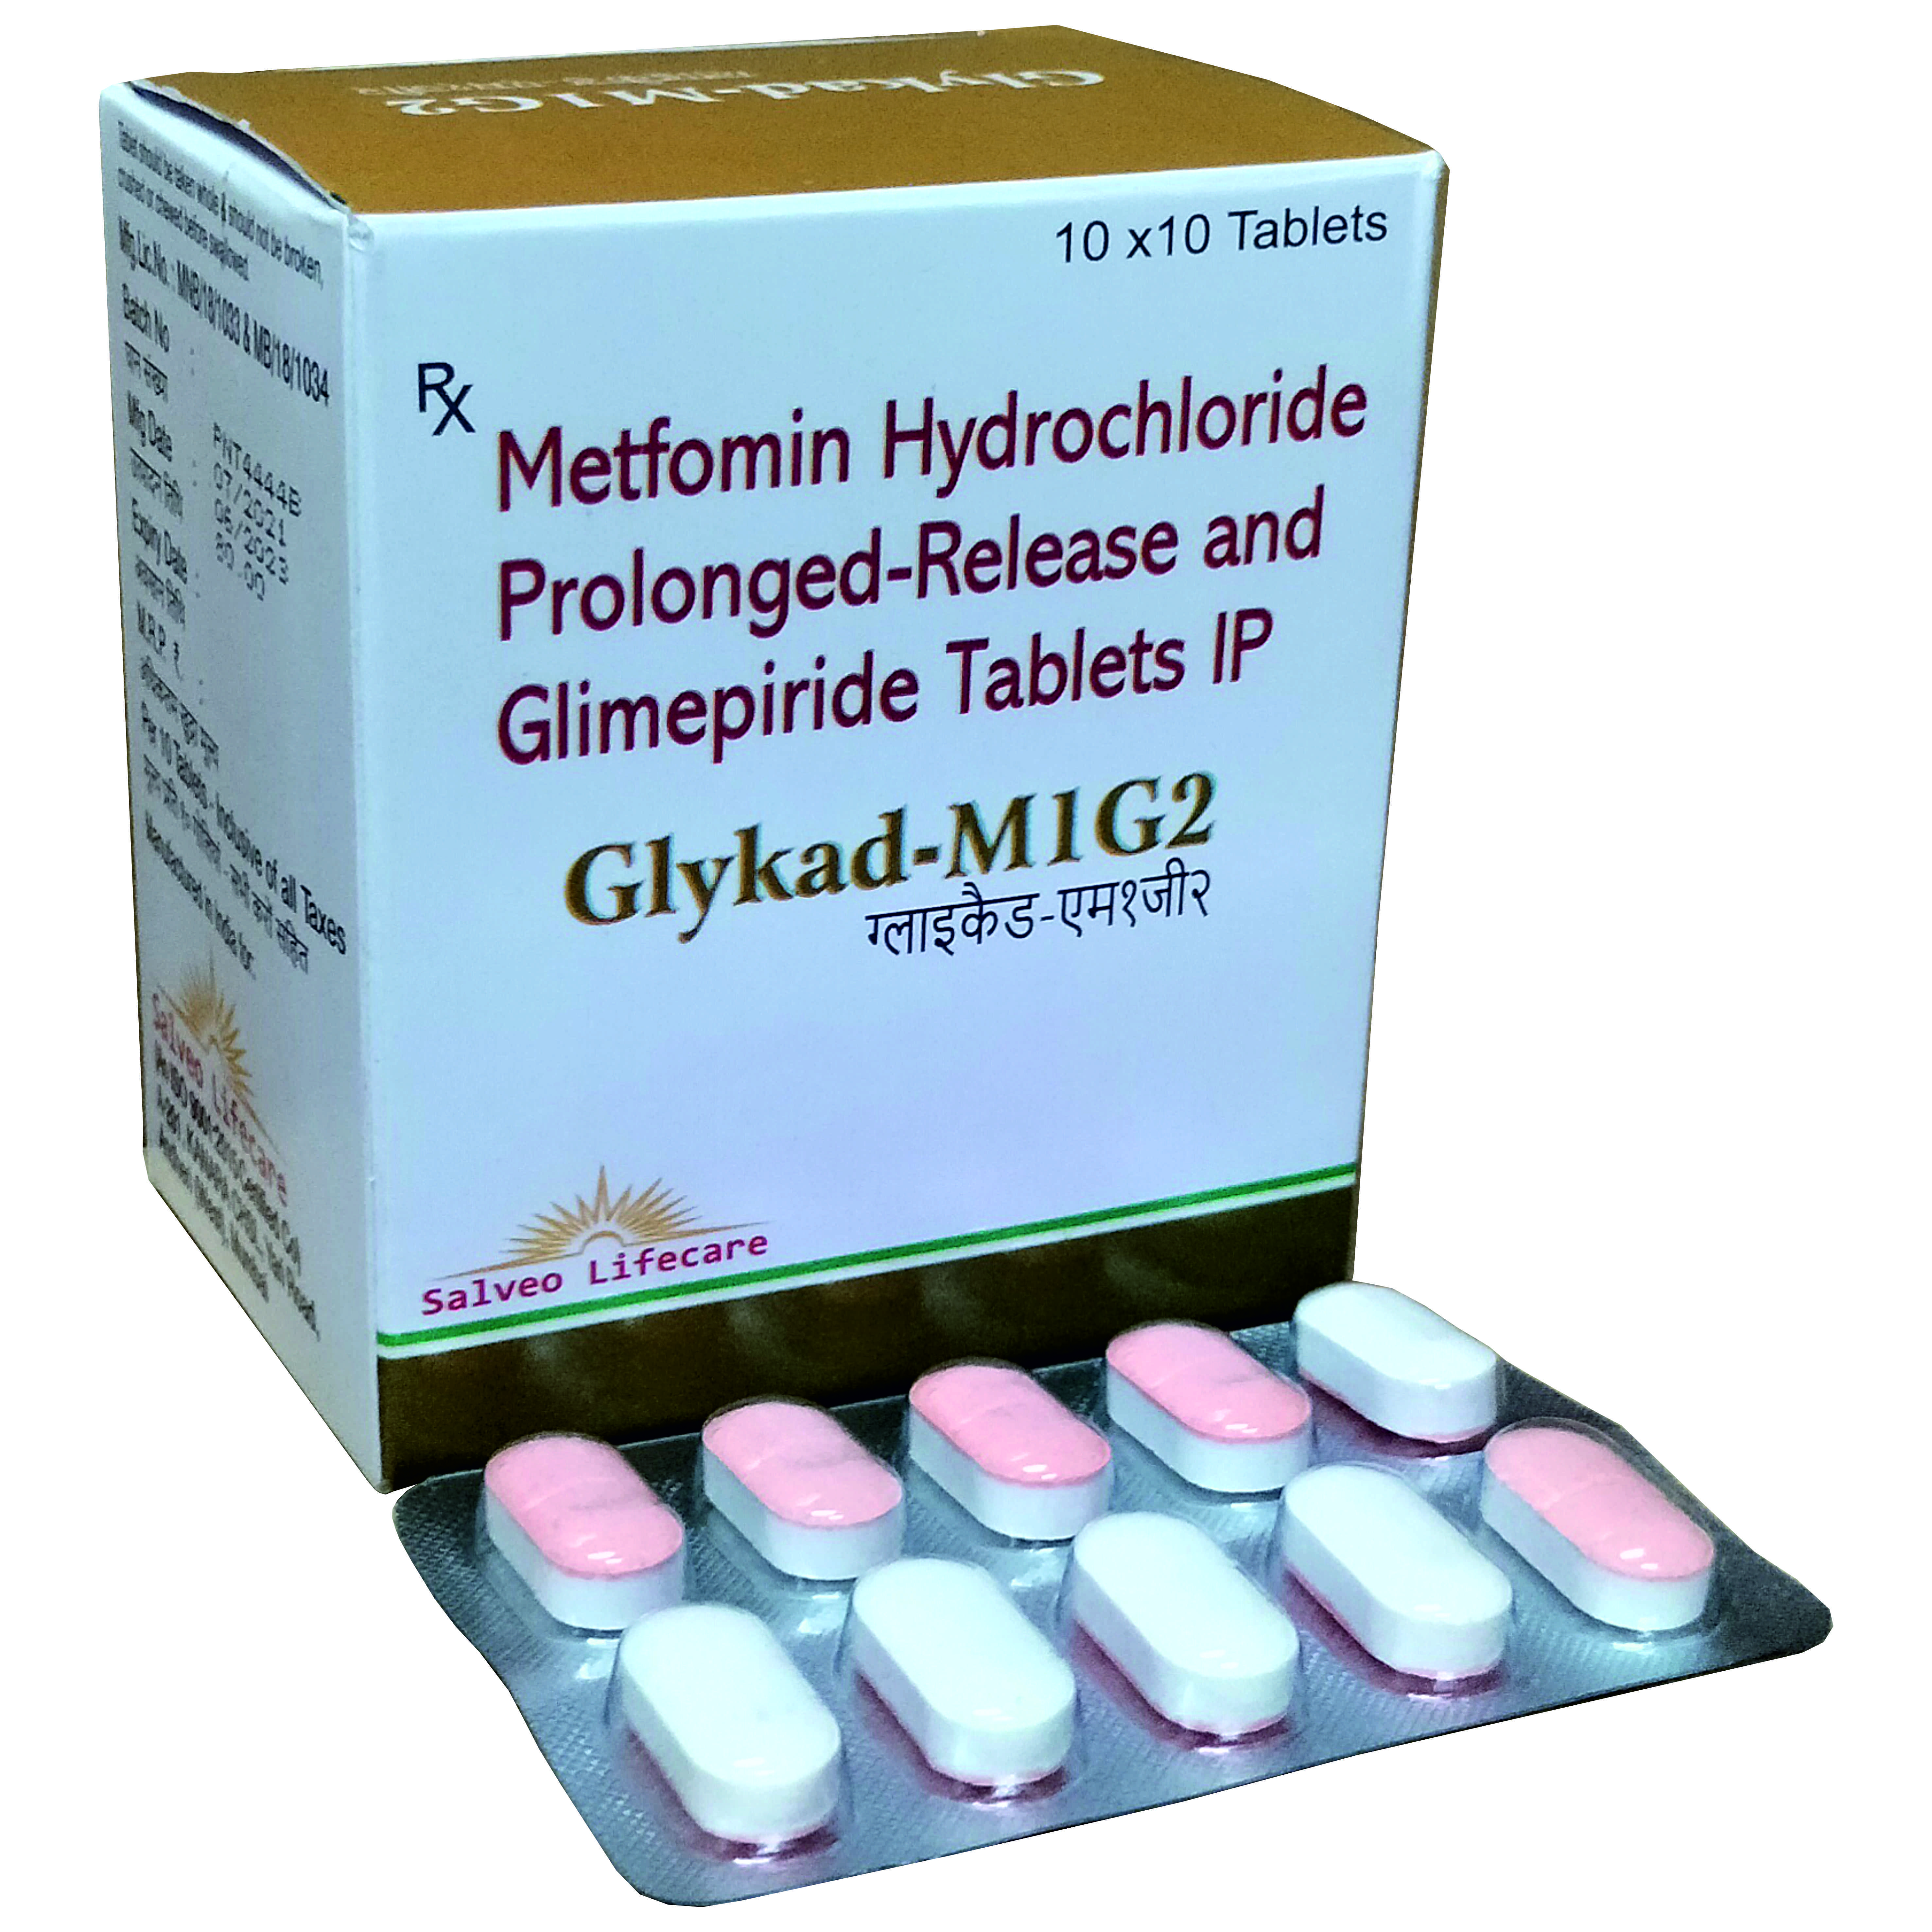 each bilayered tablet containes: : metformin 1000mg; glimipride 2mg